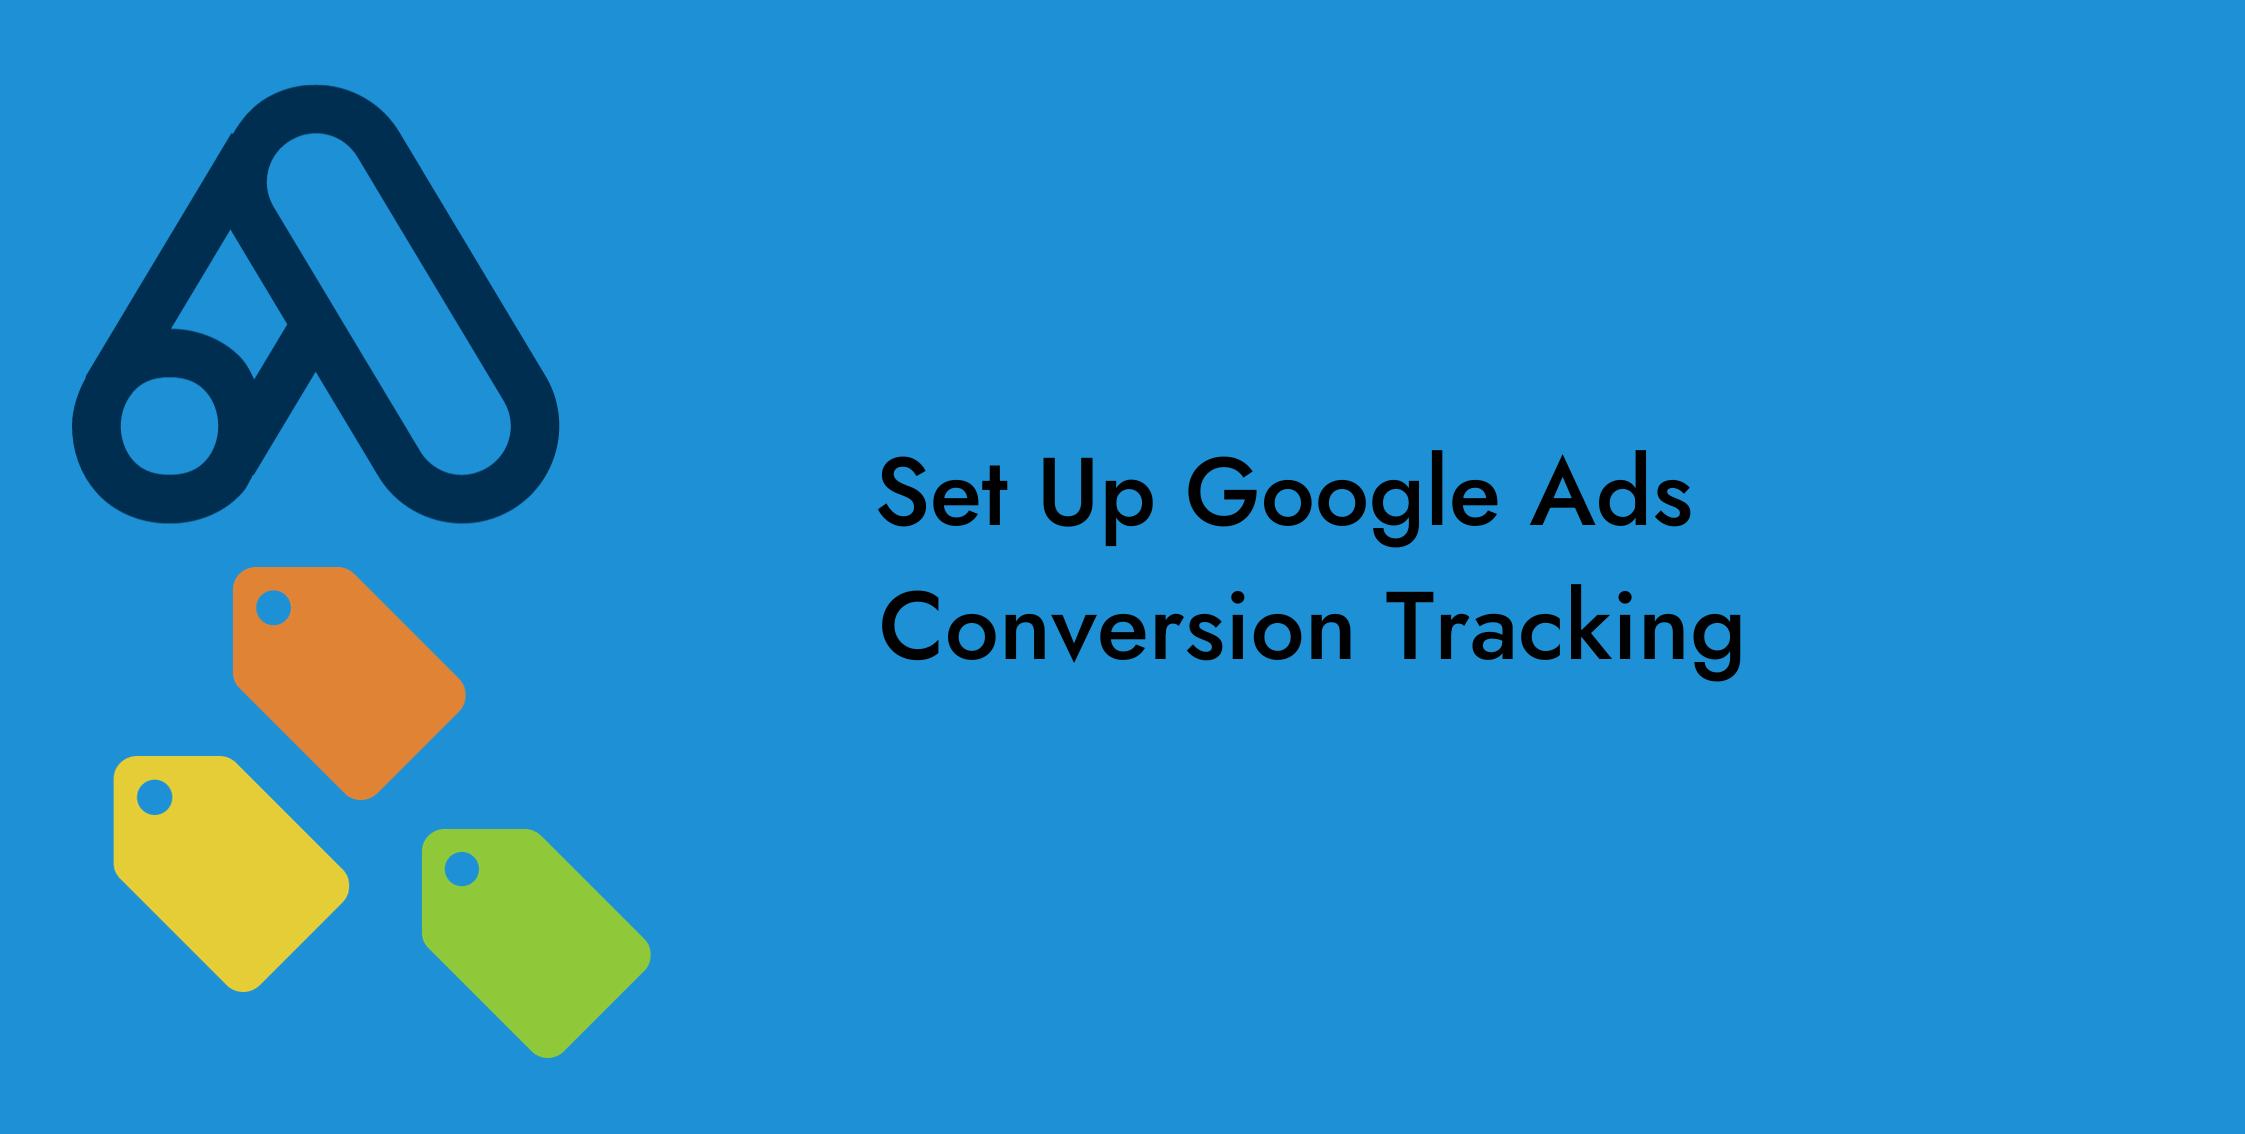 How to Set Up Google Ads Conversion Tracking?